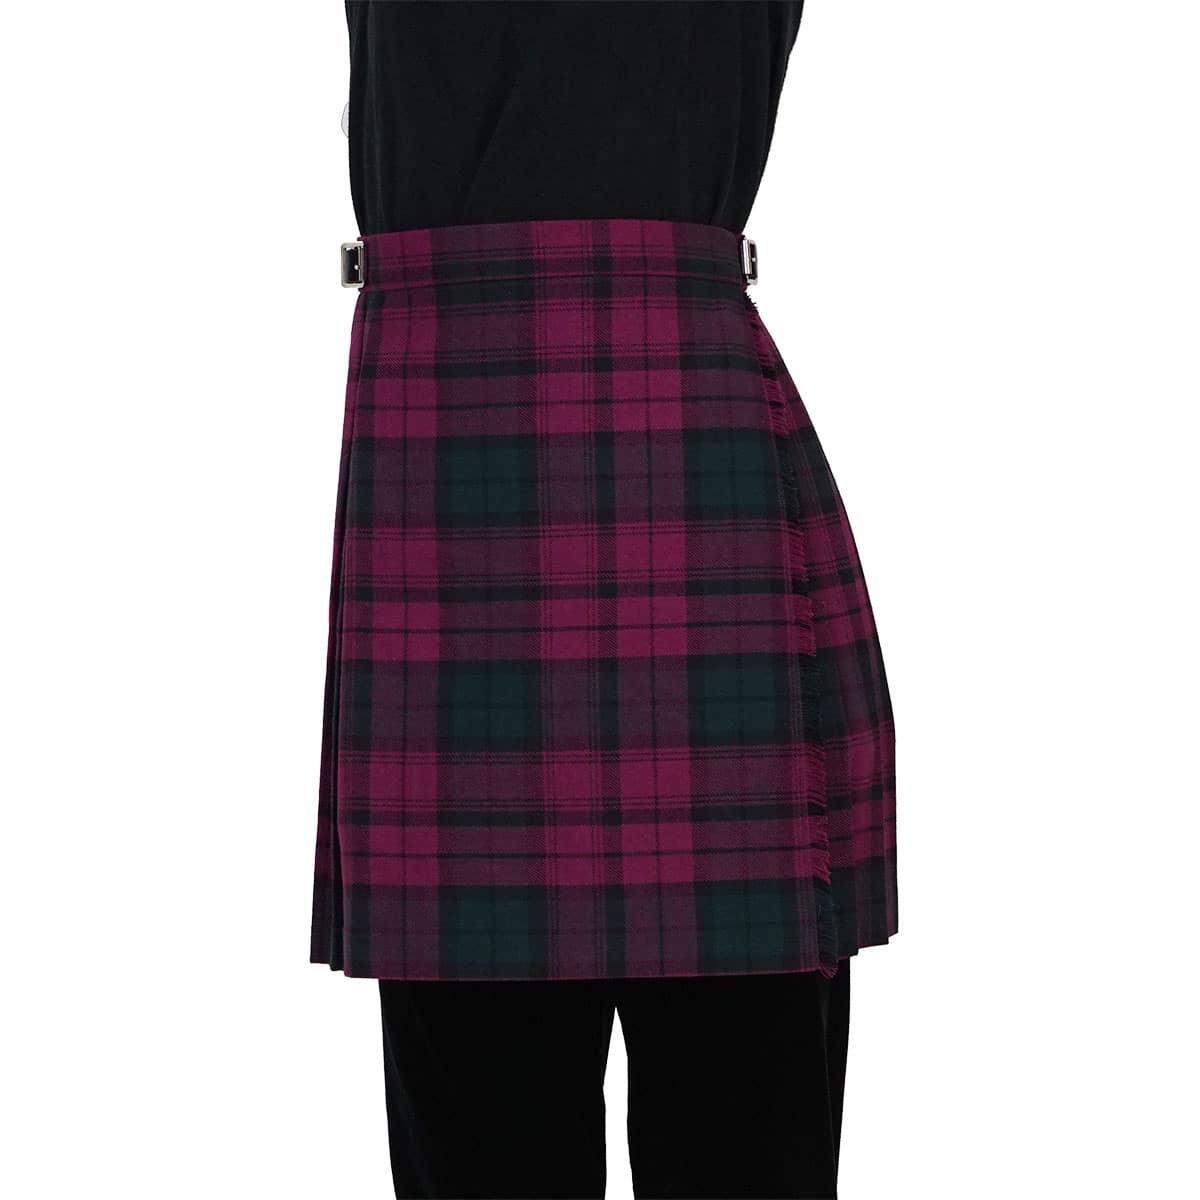 NEW KIDS TARTAN SCOTTISH KILT AVAILABLE FOR AGES 2-14 YEARS IN 4 TARTANS 